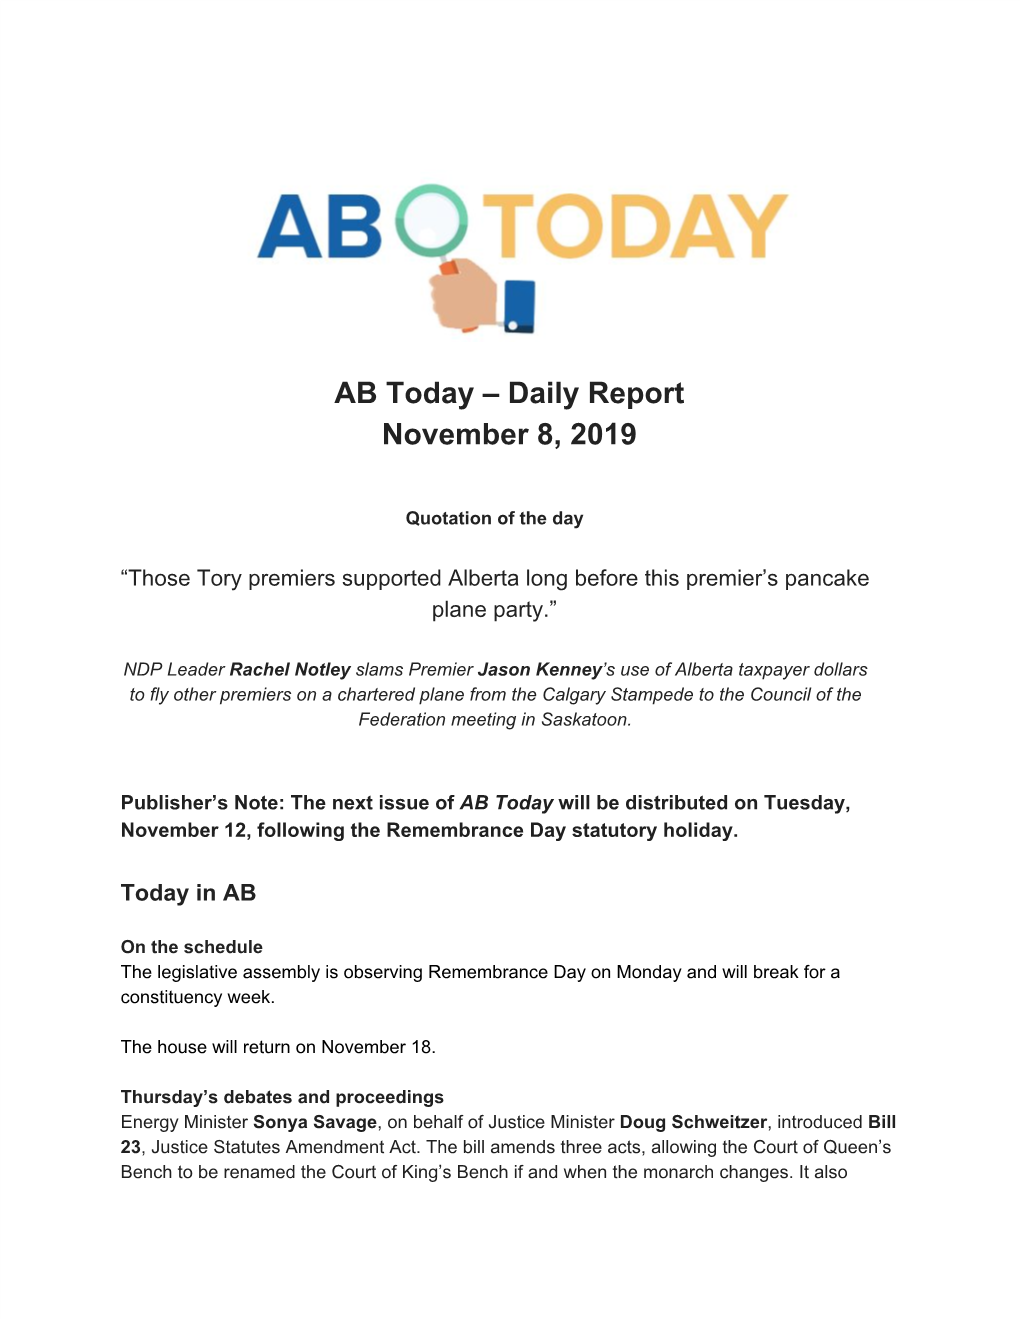 AB Today – Daily Report November 8, 2019